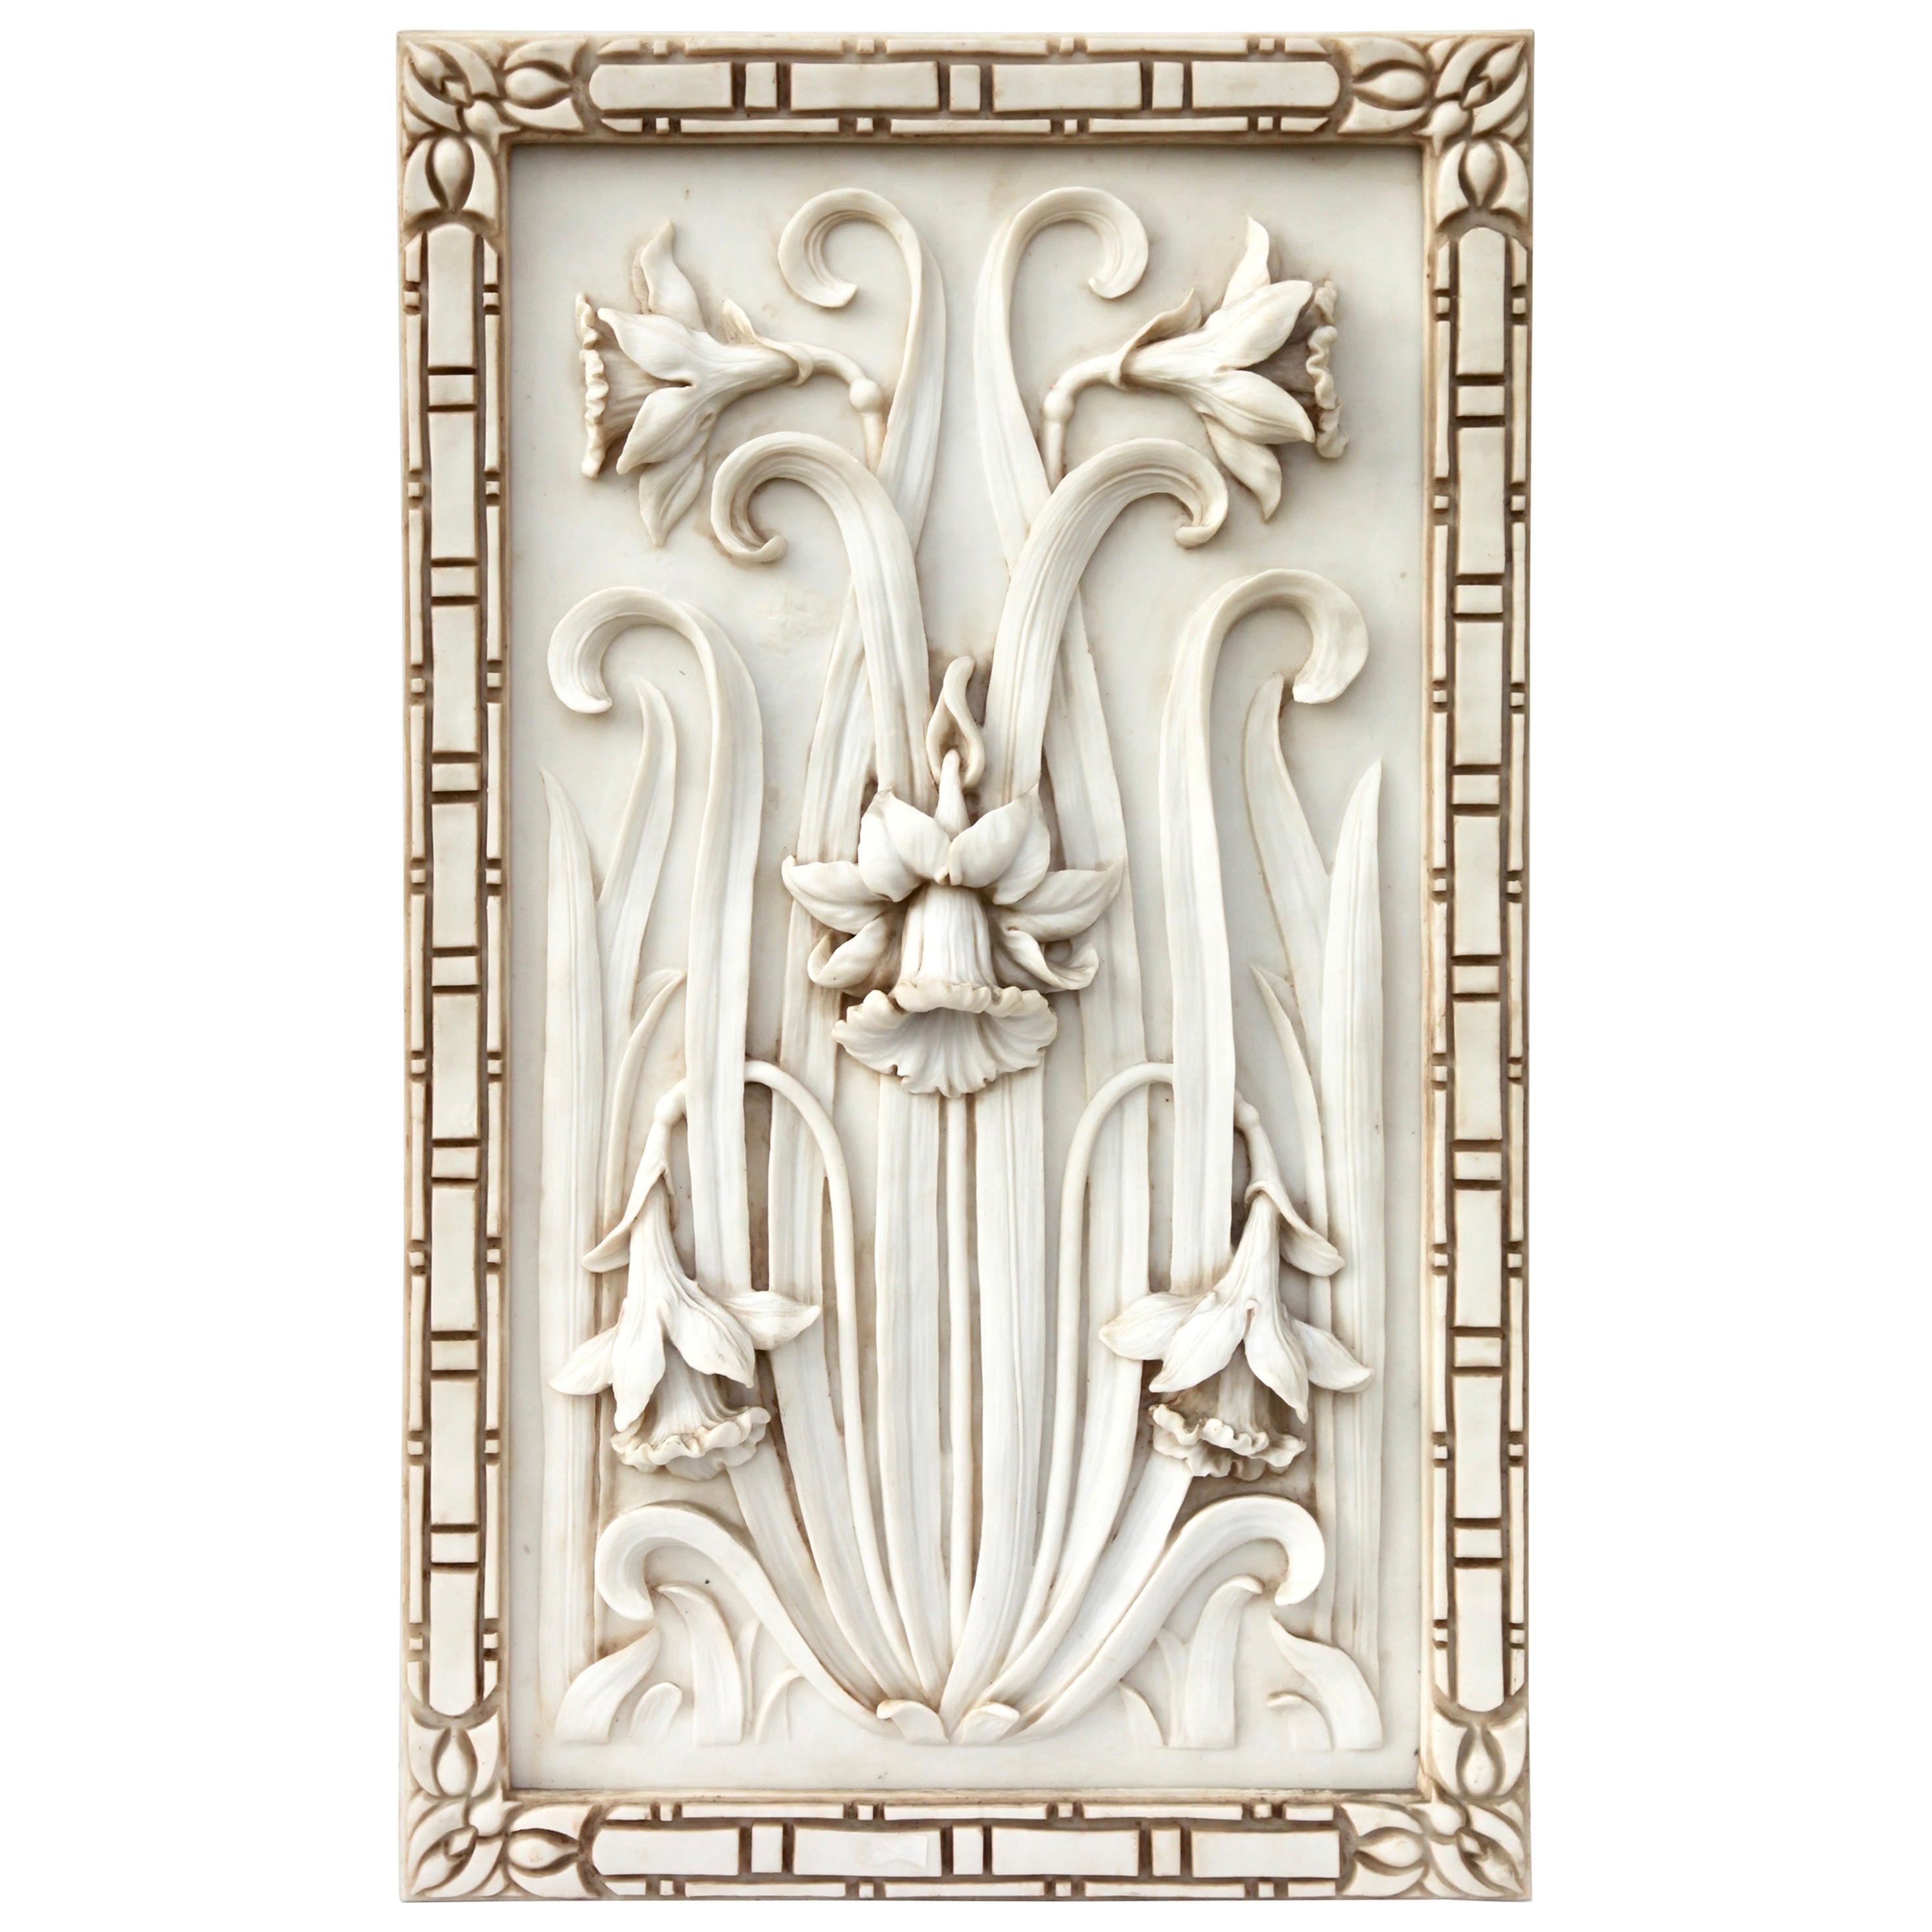 Art Nouveau 3-D Alabaster Sculptural Panel with Foliage and Daffodils / Jonquils